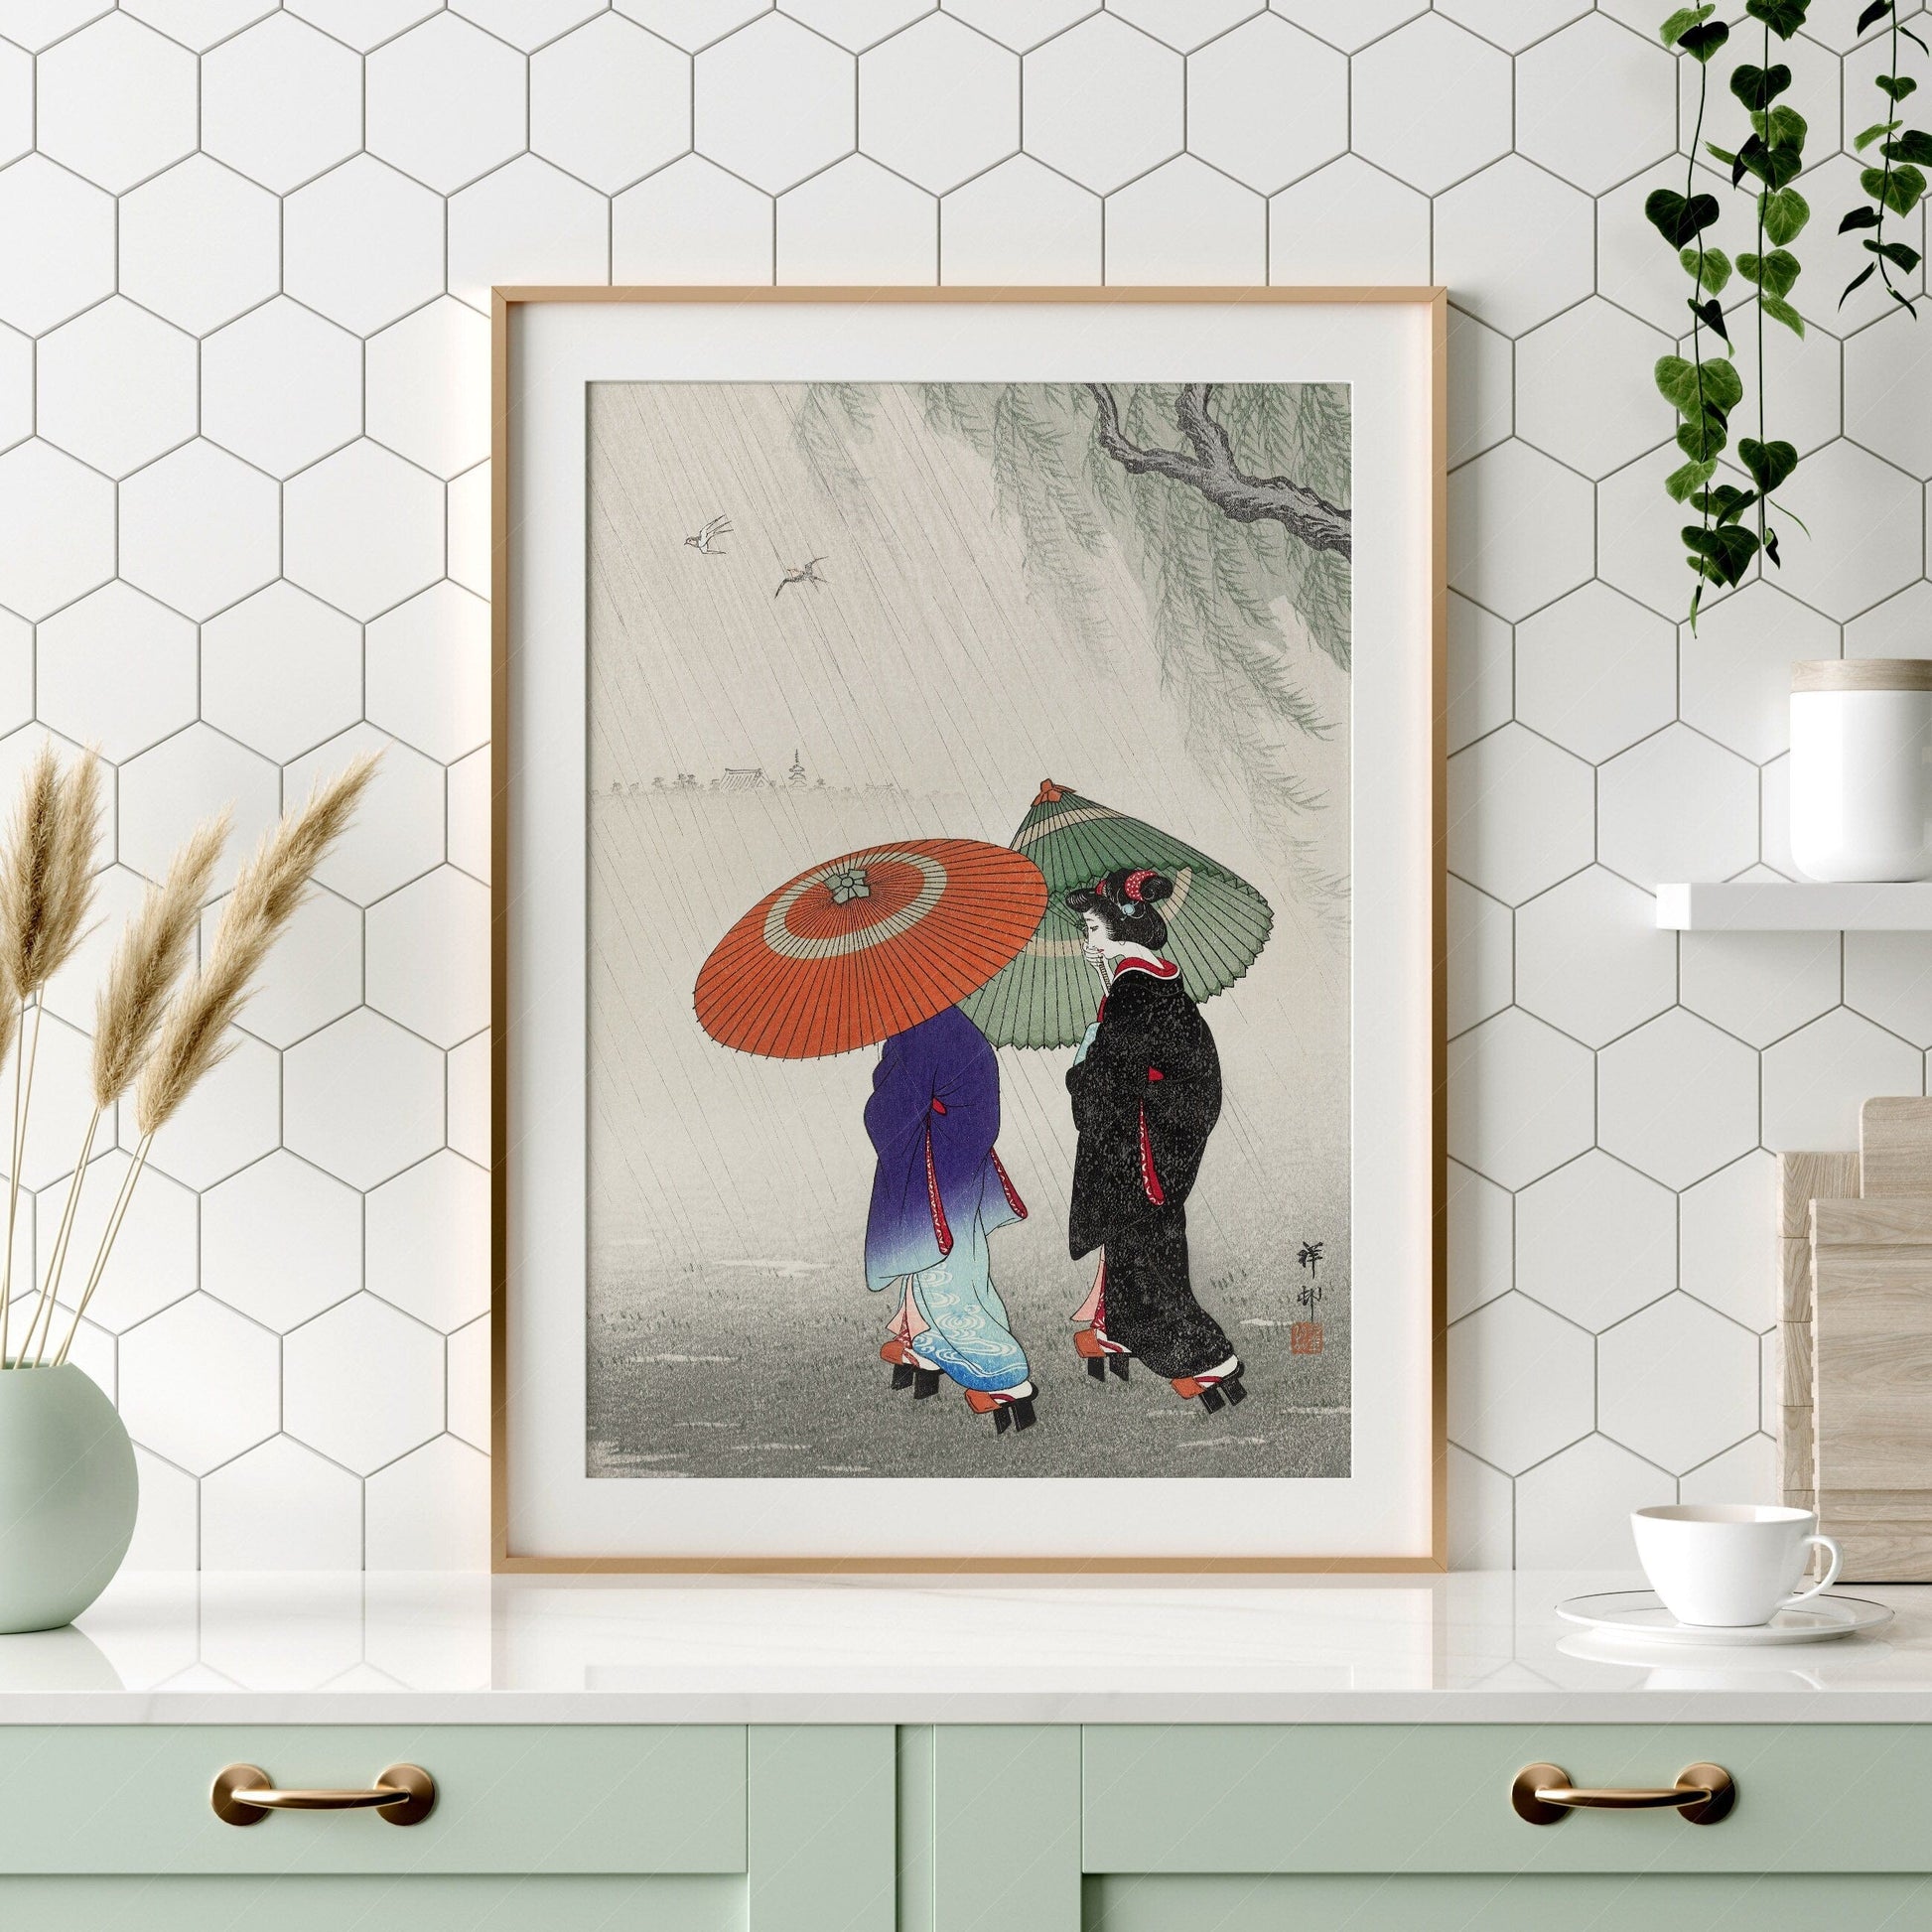 Home Poster Decor Ohara Koson Poster, Japanese Wall Art, Vintage Poster, Retro Art, Two Woman in the rain, HIGH Quality Archival Paper, Large Sizes